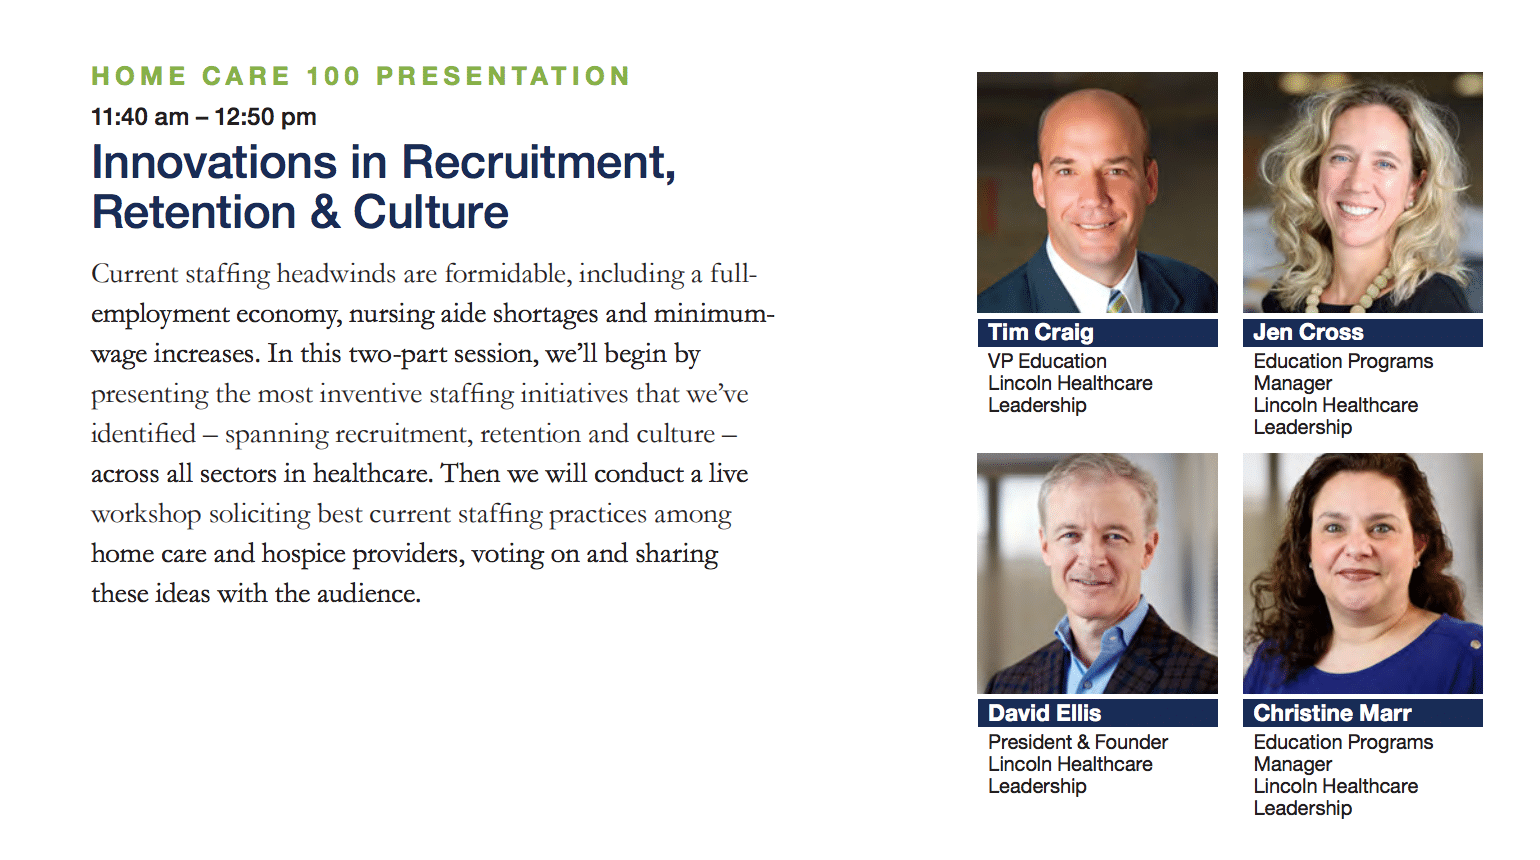 Home Care 100 presentation: Innovations in recruitment, retention and culture